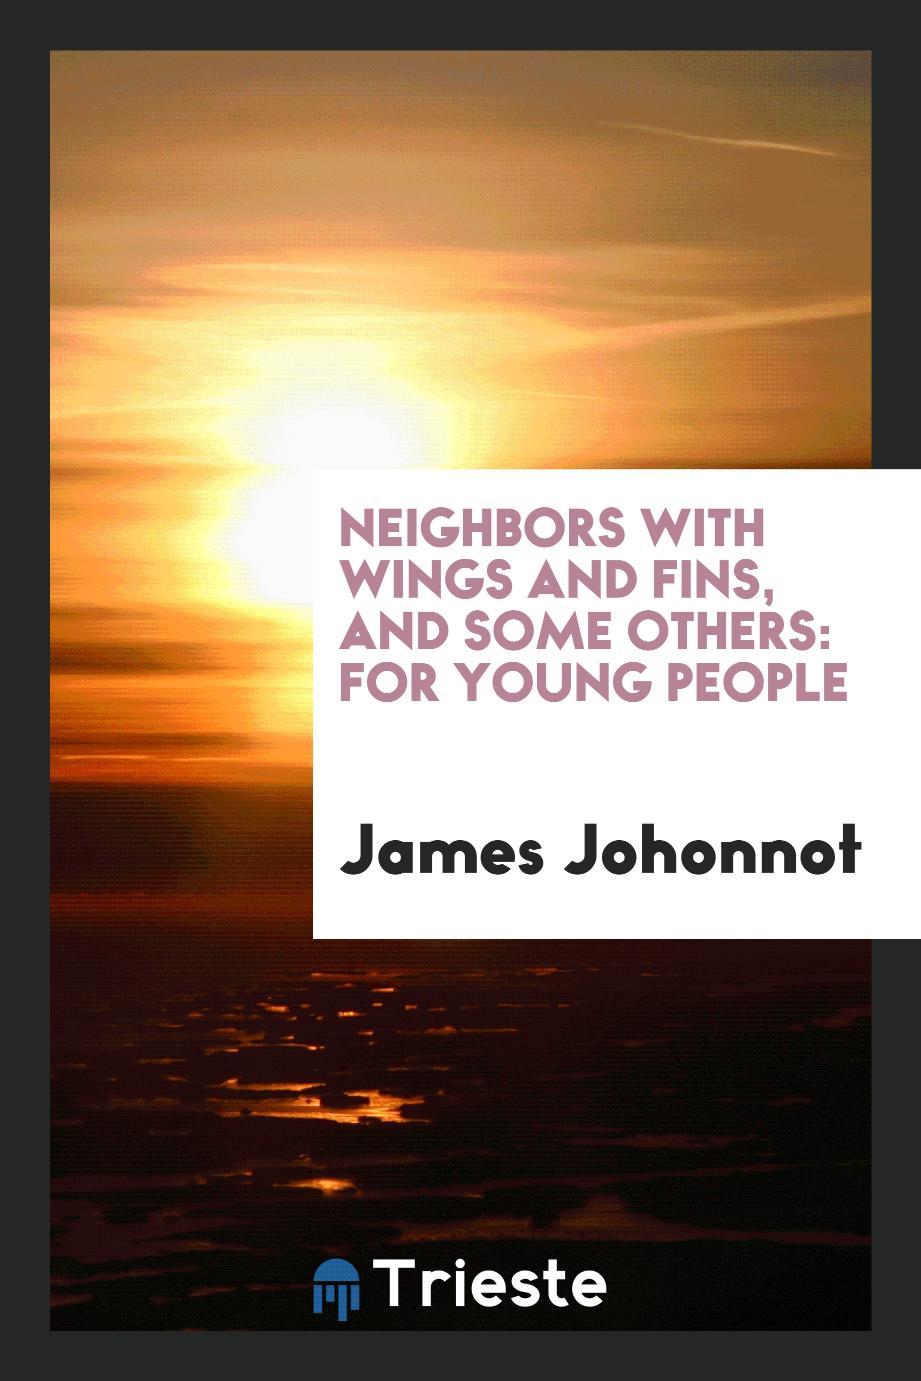 Neighbors with wings and fins, and some others: for young people